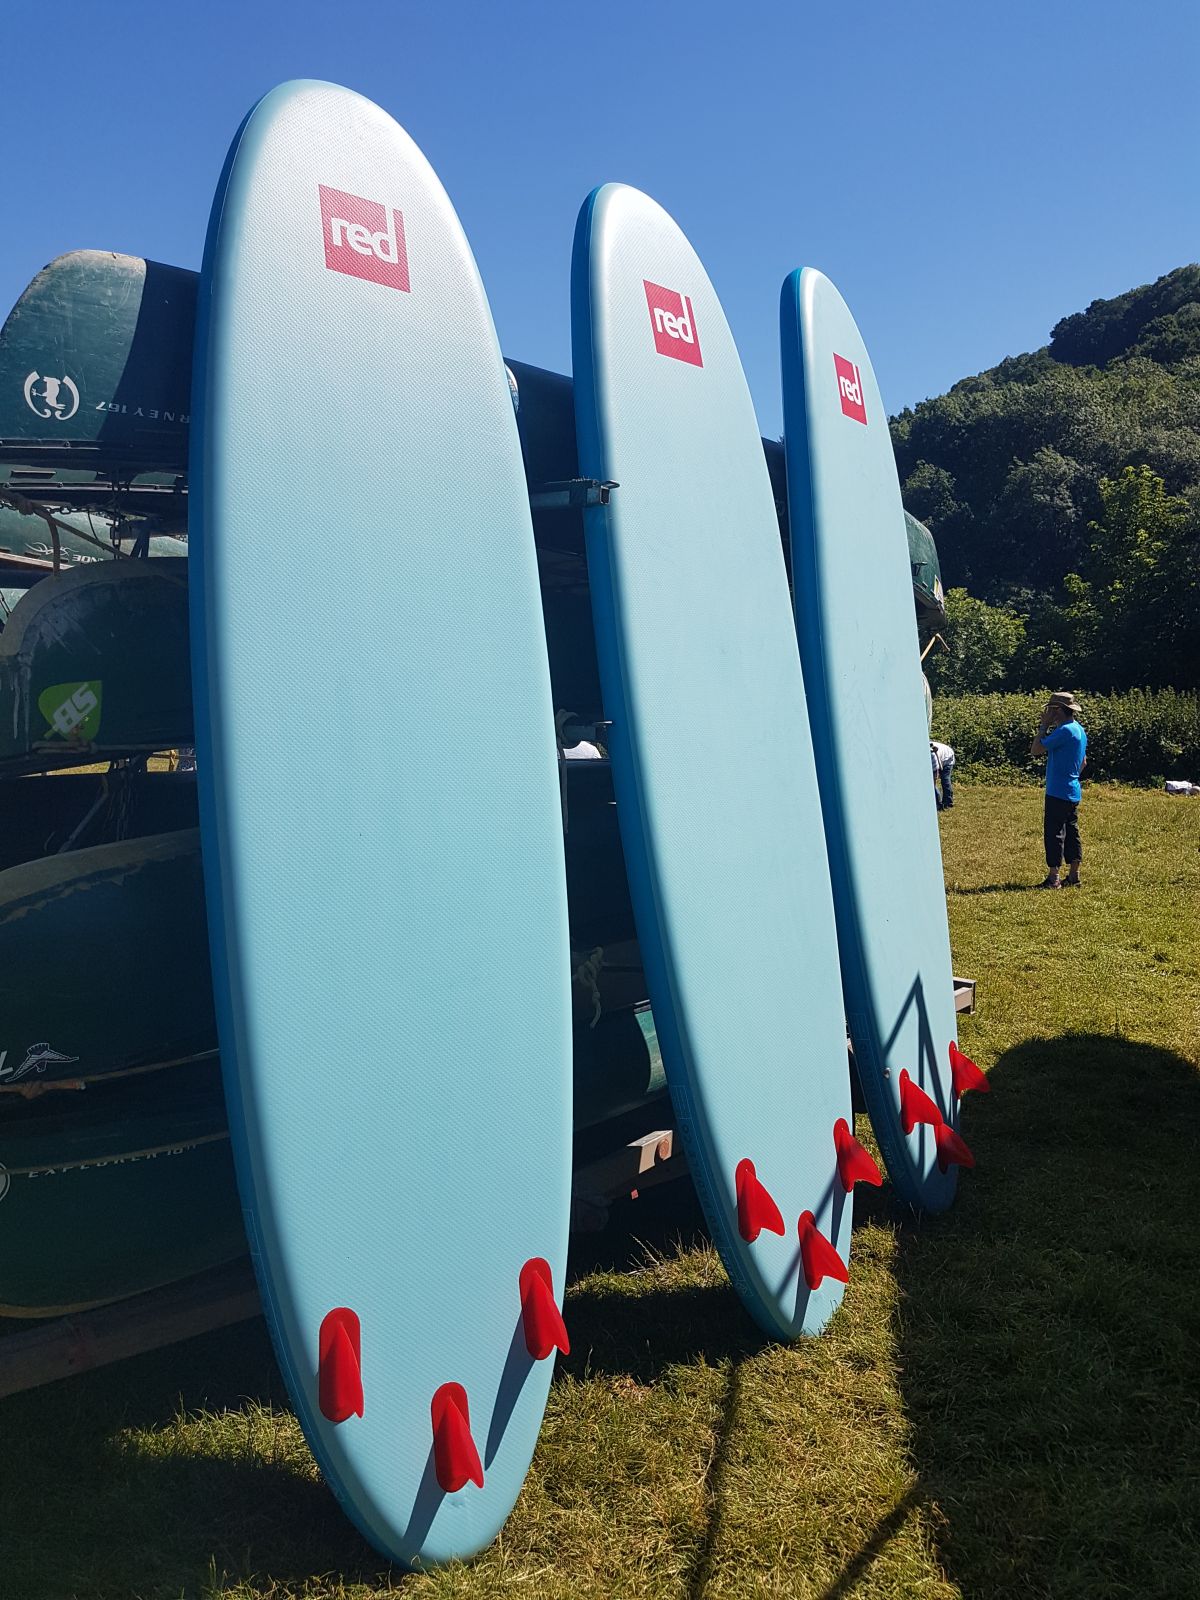 Red Paddle Boards in the sun ready to go